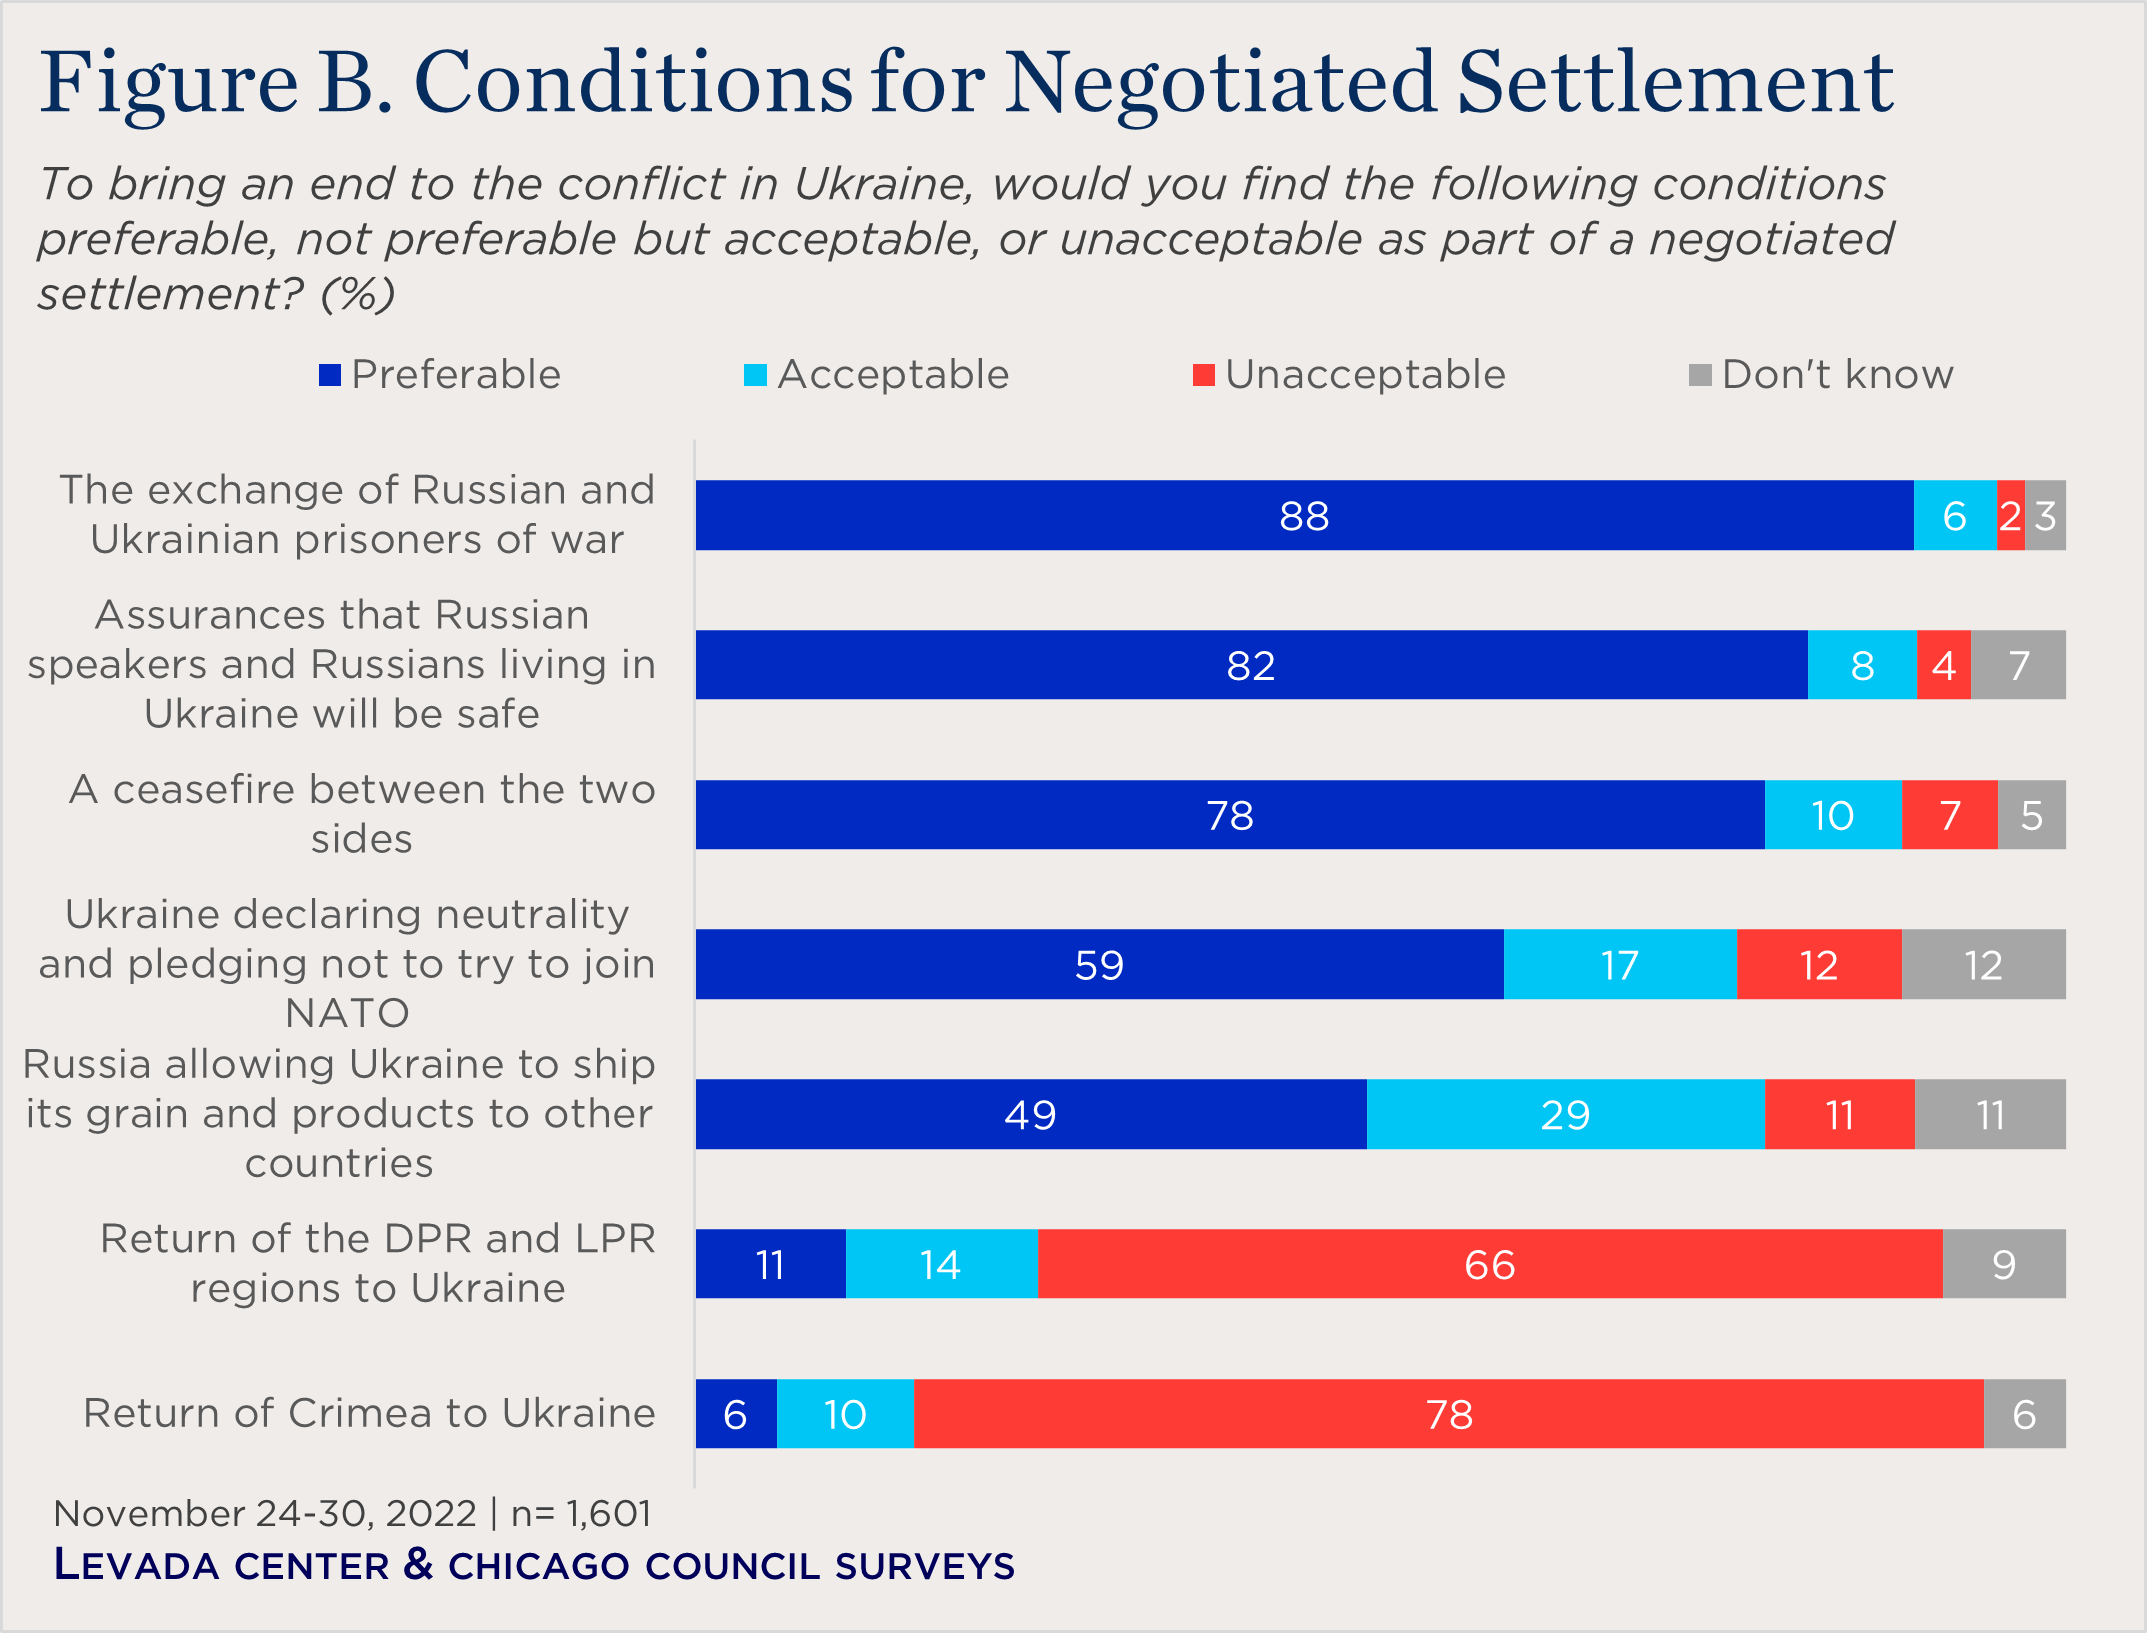 "bar chart of views on conditions for settlement"